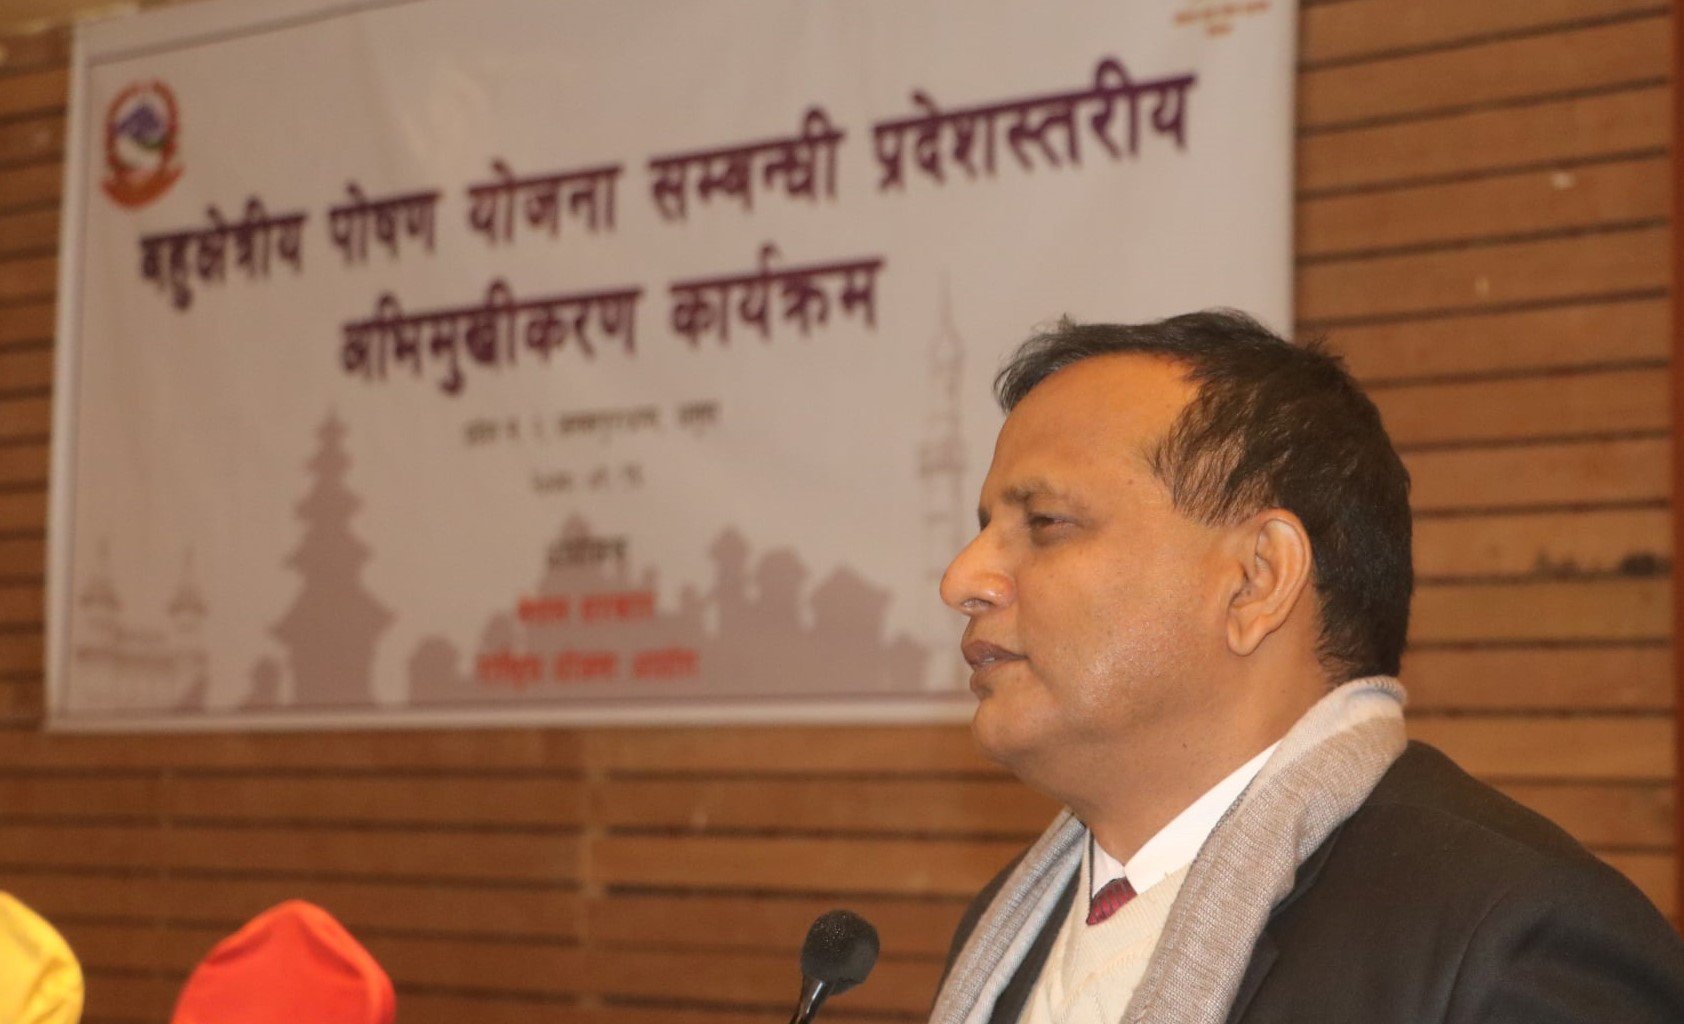 nutrition-related-programme-should-be-taken-to-peoples-level-cm-raut